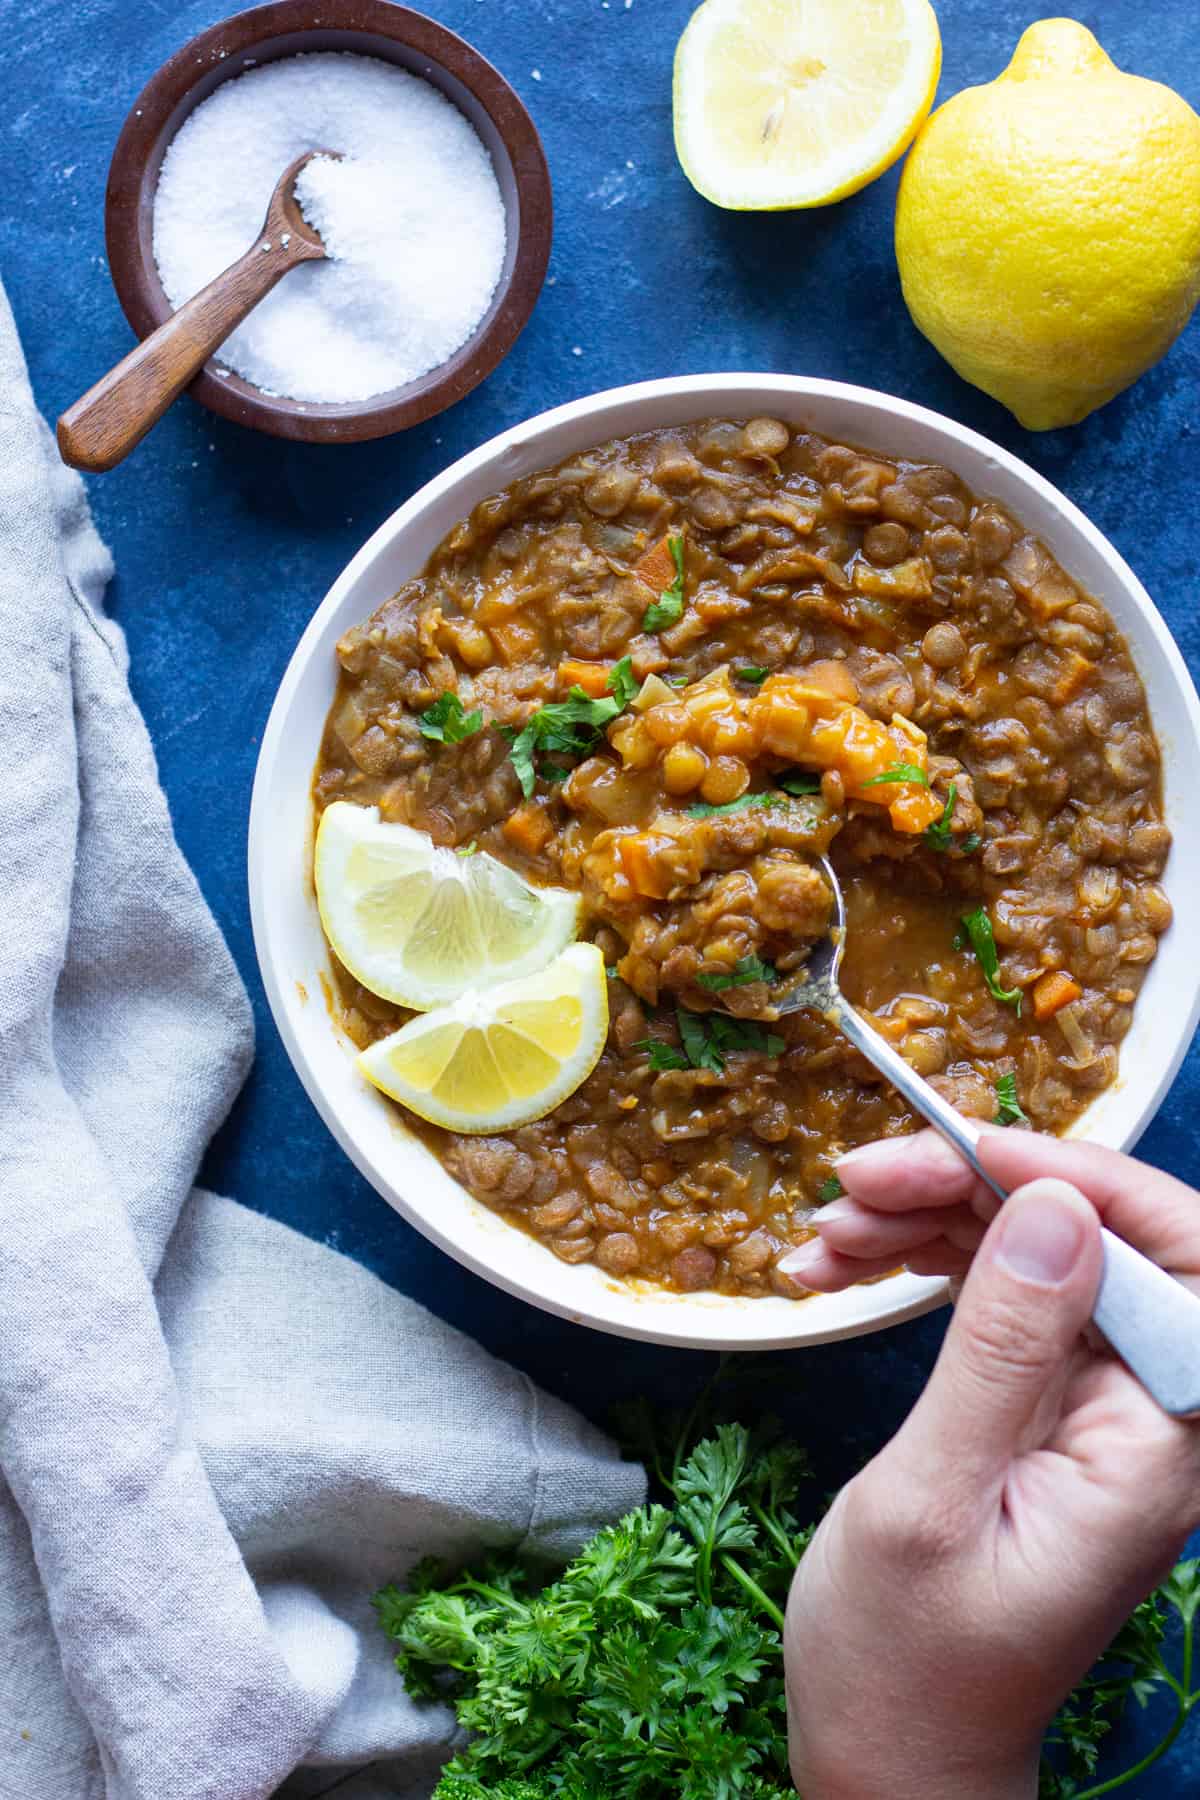 Ready in 25 minutes, this easy instant pot lentil soup recipe is perfect for weeknight dinners. It's packed with tasty ingredients and is pretty much a hands-off lentil soup recipe. 
